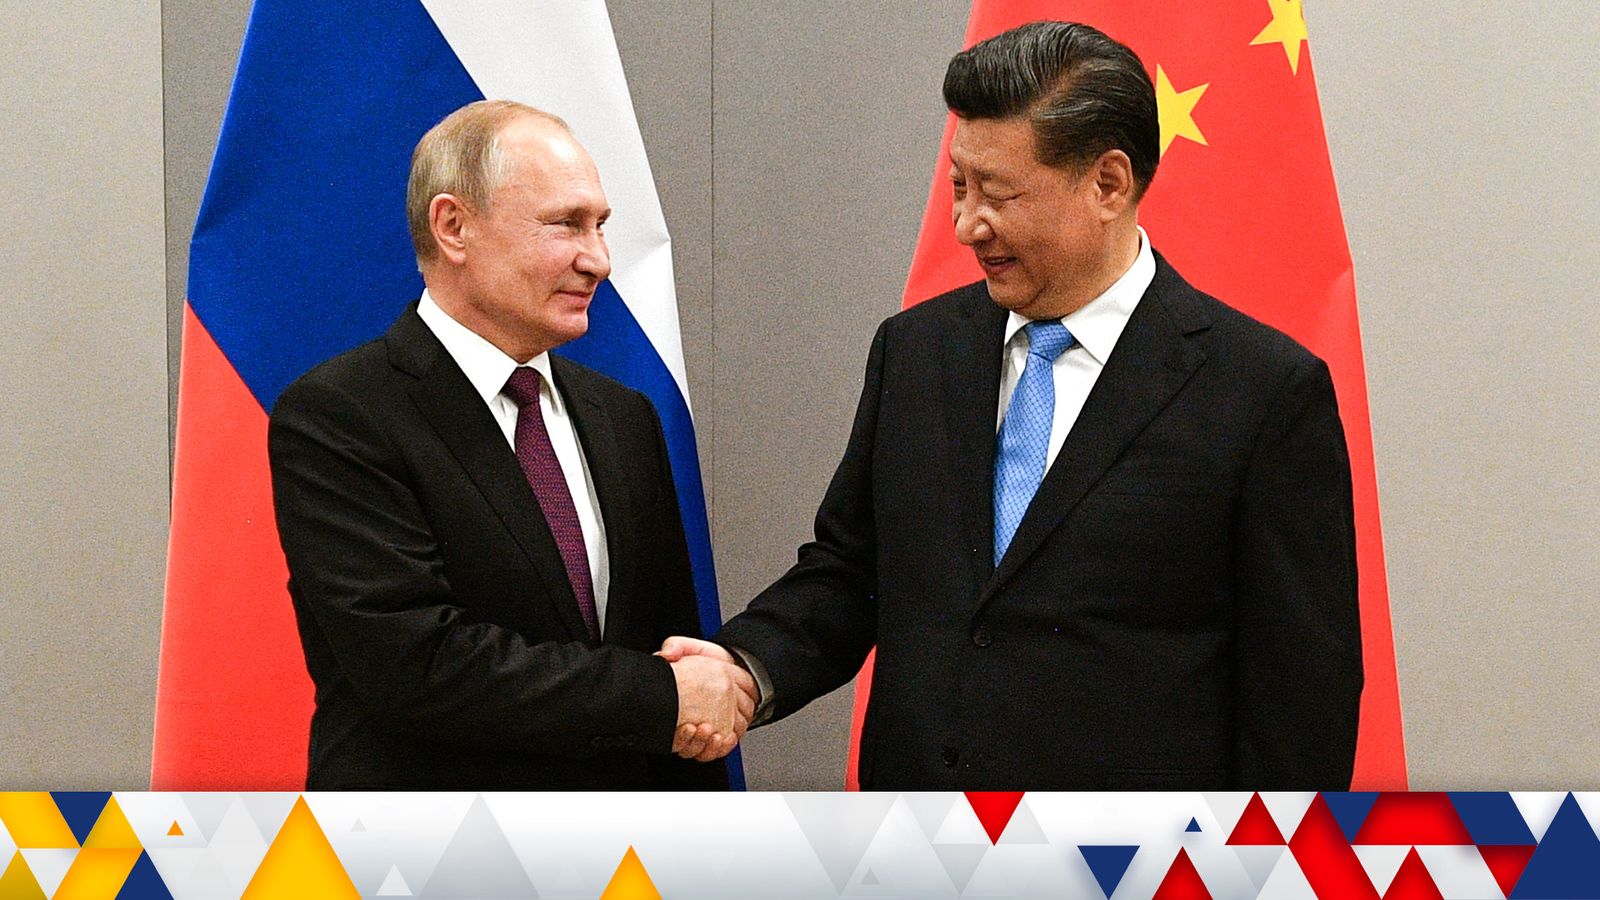 Vladimir Putin says Russia and China are fighting 'common threats' ahead of President Xi Jinping's visit